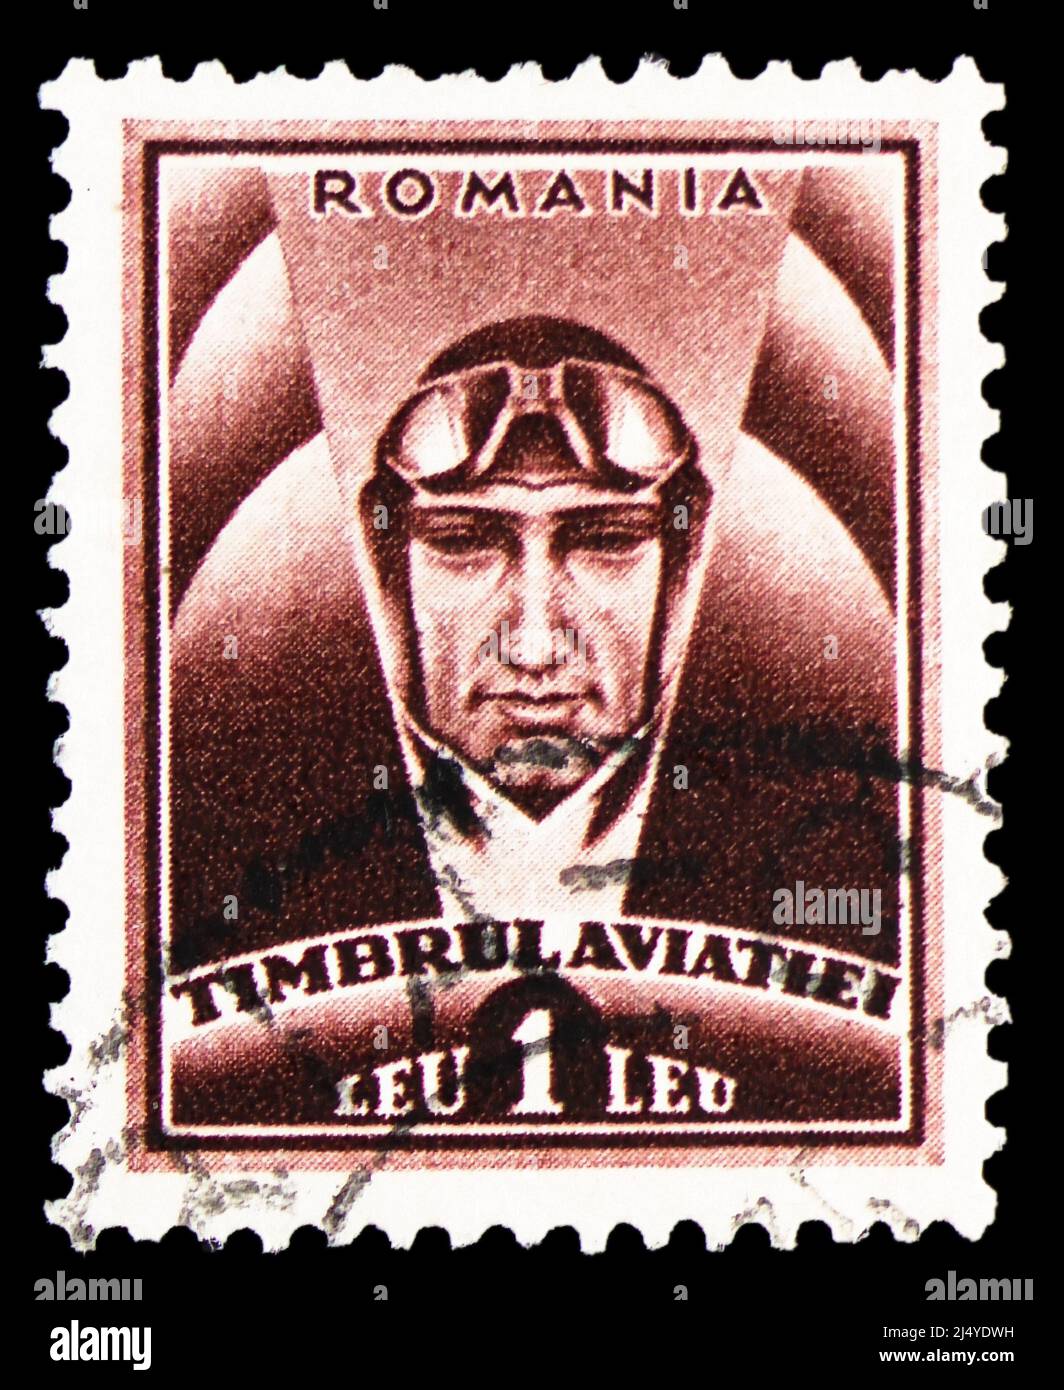 MOSCOW, RUSSIA - MARCH 27, 2022: Postage stamp printed in Romania shows Aviator, Aviation Tax serie, circa 1932 Stock Photo